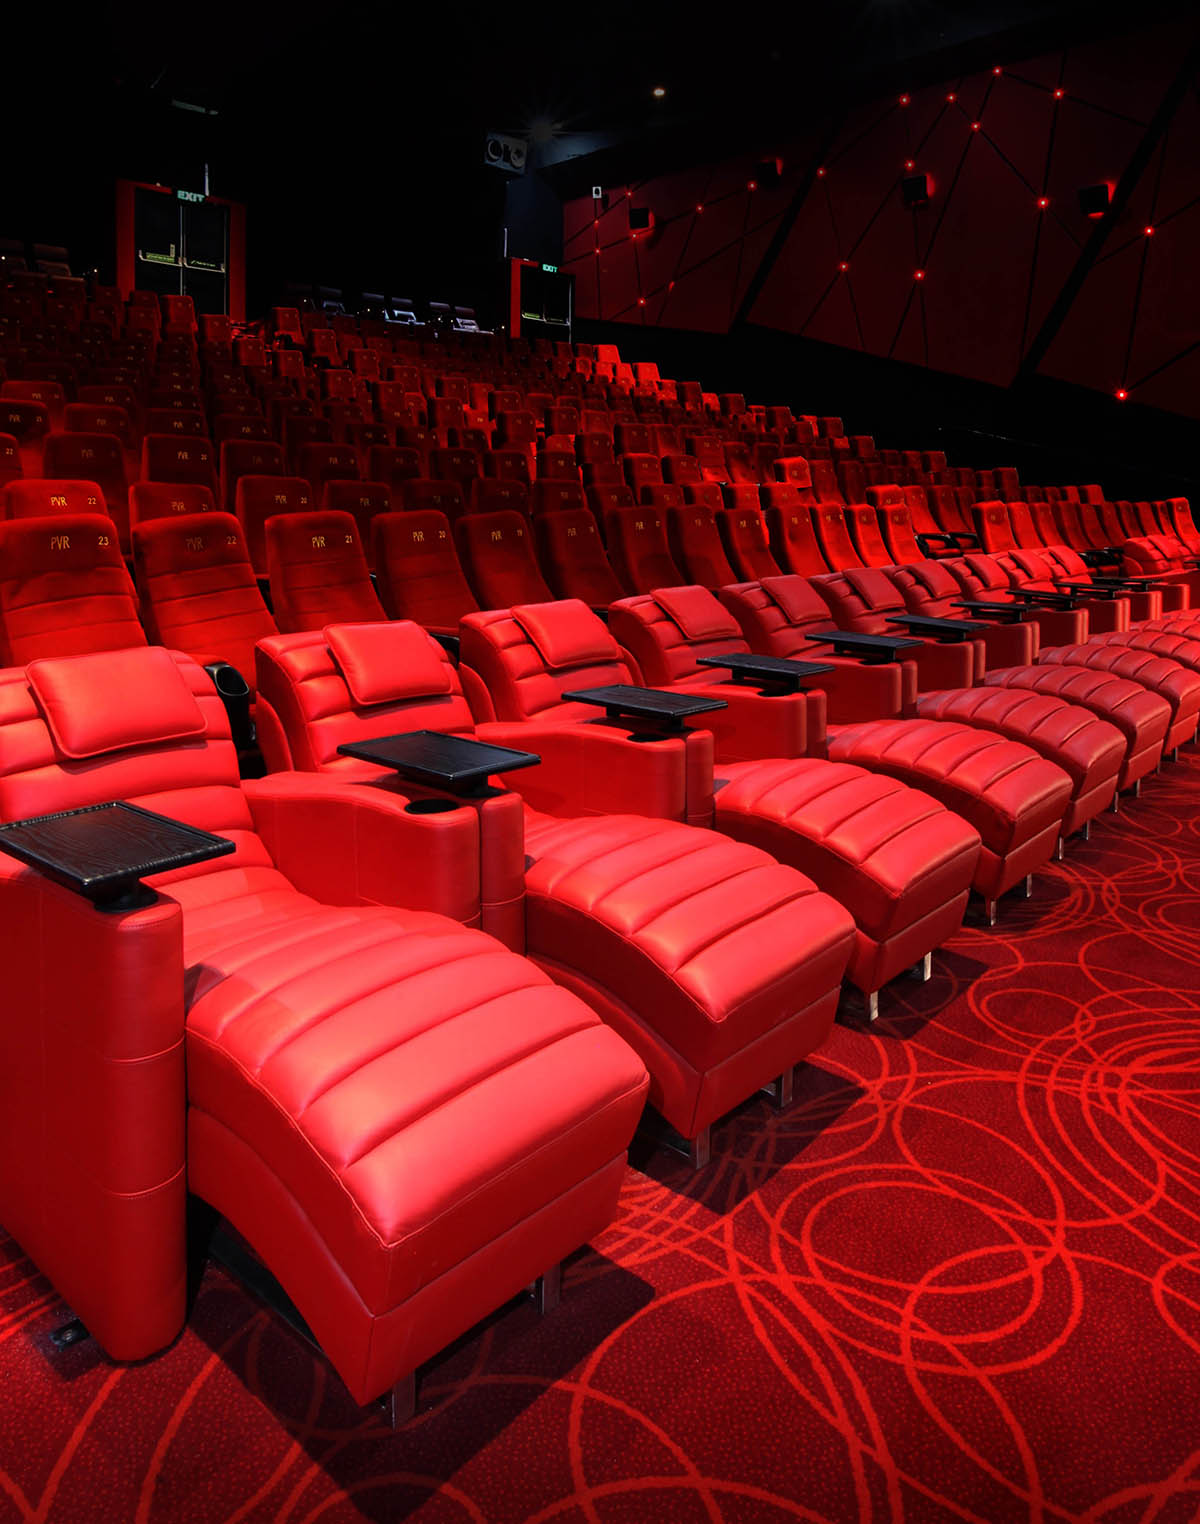 Belfort Lounger installed at PVR P[XL] Mumbai, pvr recliner seats, recliner seats in pvr, Recliners in pvr cinemas, couple recliner seats in pvr, lounger in pvr, recliner chair in pvr, recliner in pvr, recliner pvr, recliner chair pvr, pvr lounger pvr lounger seats, lounger seats in pvr, pvr prime seats, pvr gold class couple seats, how to open recliner chair in pvr, recliner theater seats, recliner seat cinema, recliner movie chairs, movie recliner, theatre reclinerm, recliner in movie theater, movie theater recliner seats, recliner movie seats, recliner seat theater, reclining seats movie theater, recliner seats in cinema, recliner movie theater near me, cinema chairs, bed theatre, gold seat in theatre, pvr gold class couple recliner seats